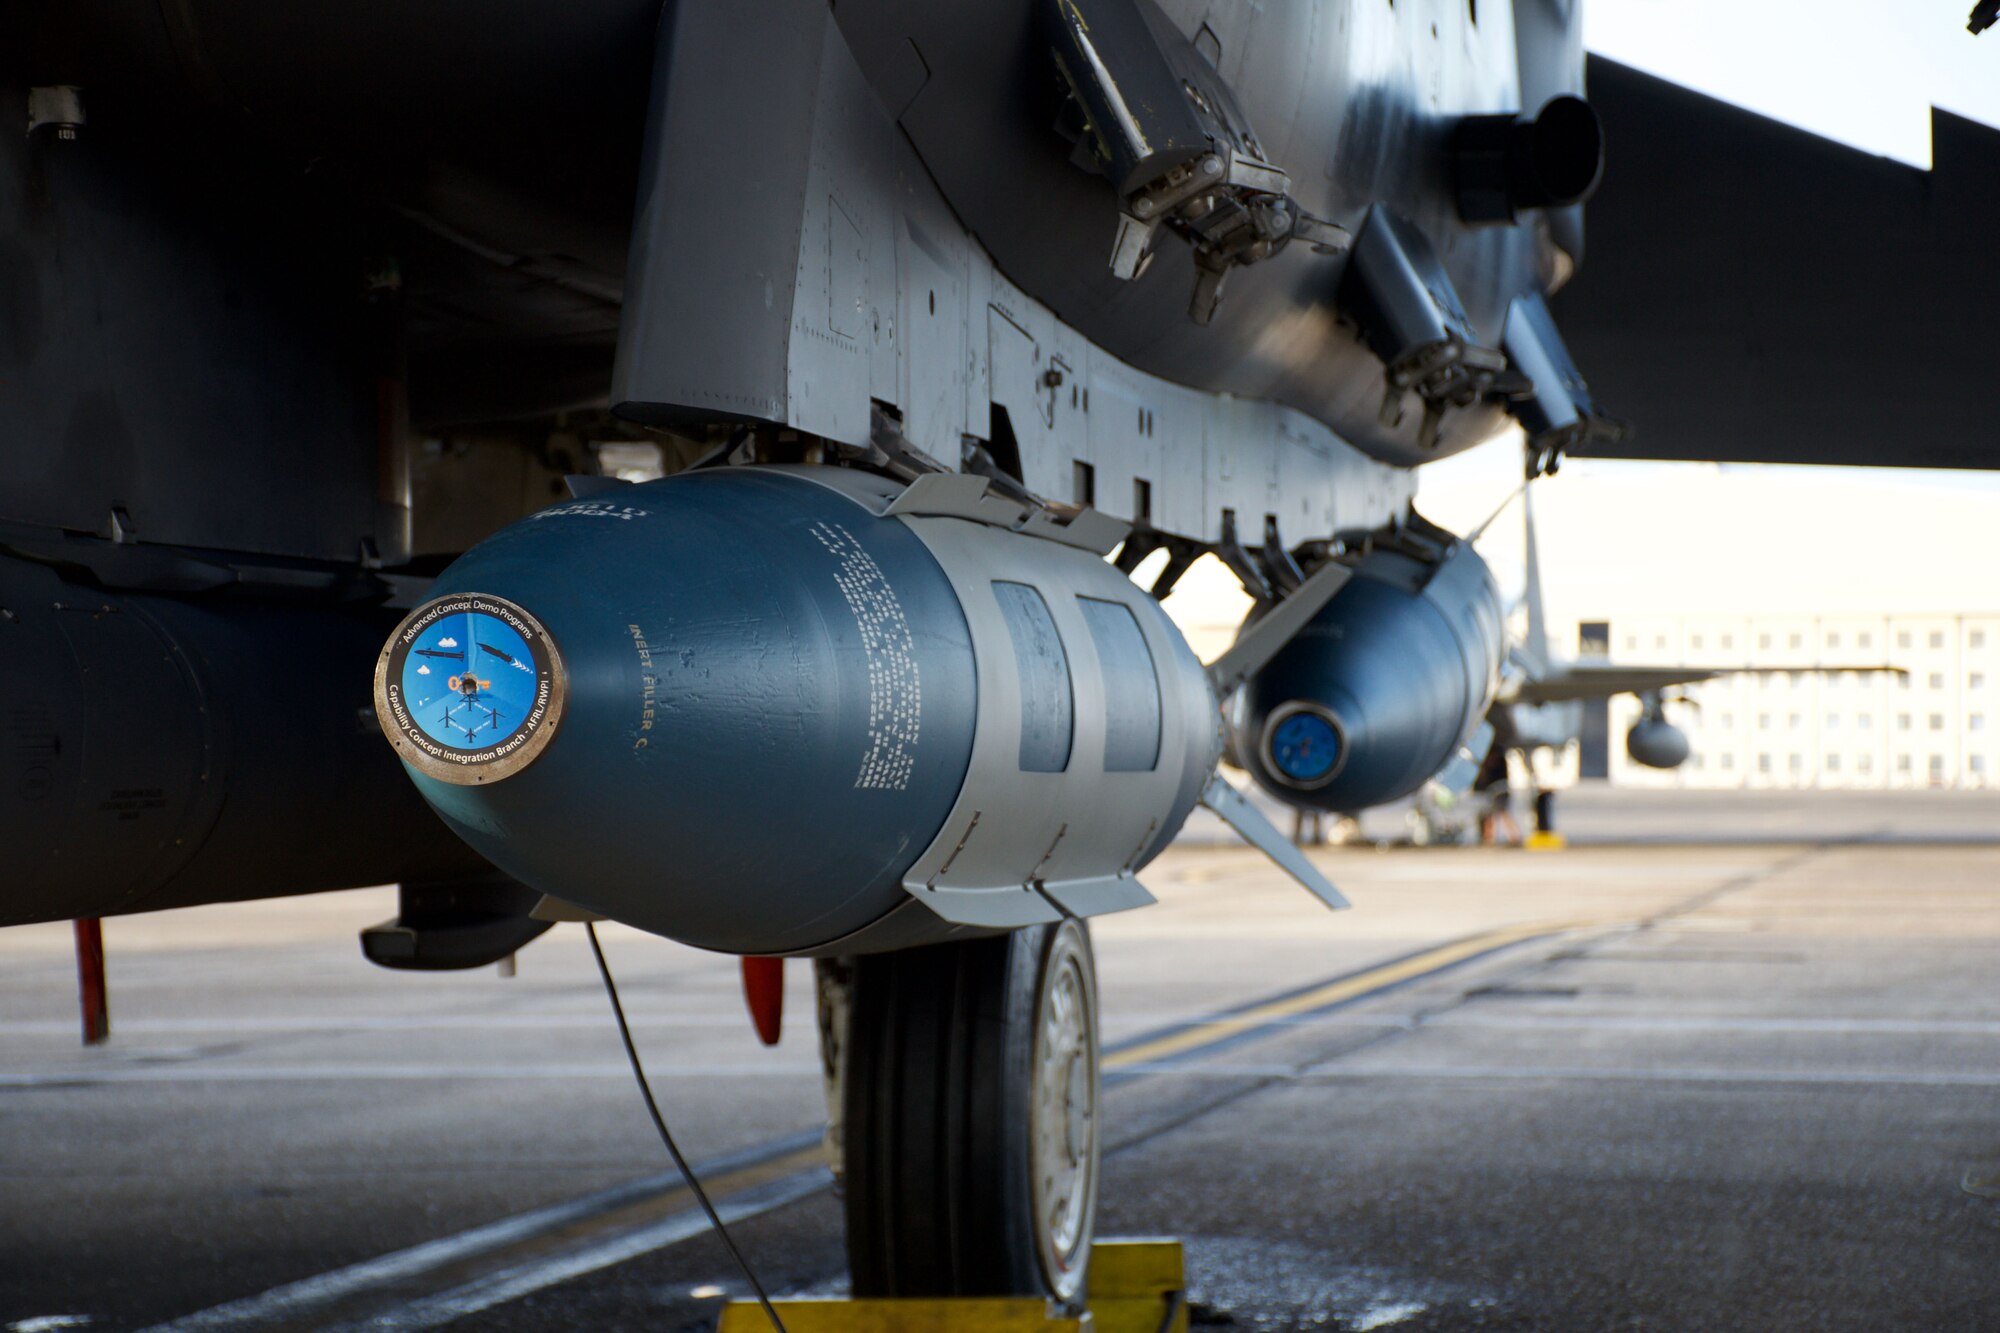 The 85th Test and Evaluation Squadron partnered with the  Air Force Research Laboratory to equip the F-15E Strike Eagle with modified 2,000-pound GBU-31 Joint Direct Attack Munitions. The goal of this test was to validate a new way to employ air-delivered munitions on ships that will change the maritime target lethality paradigm. (U.S. Air Force photo by 1st Lt Lindsey Heflin)